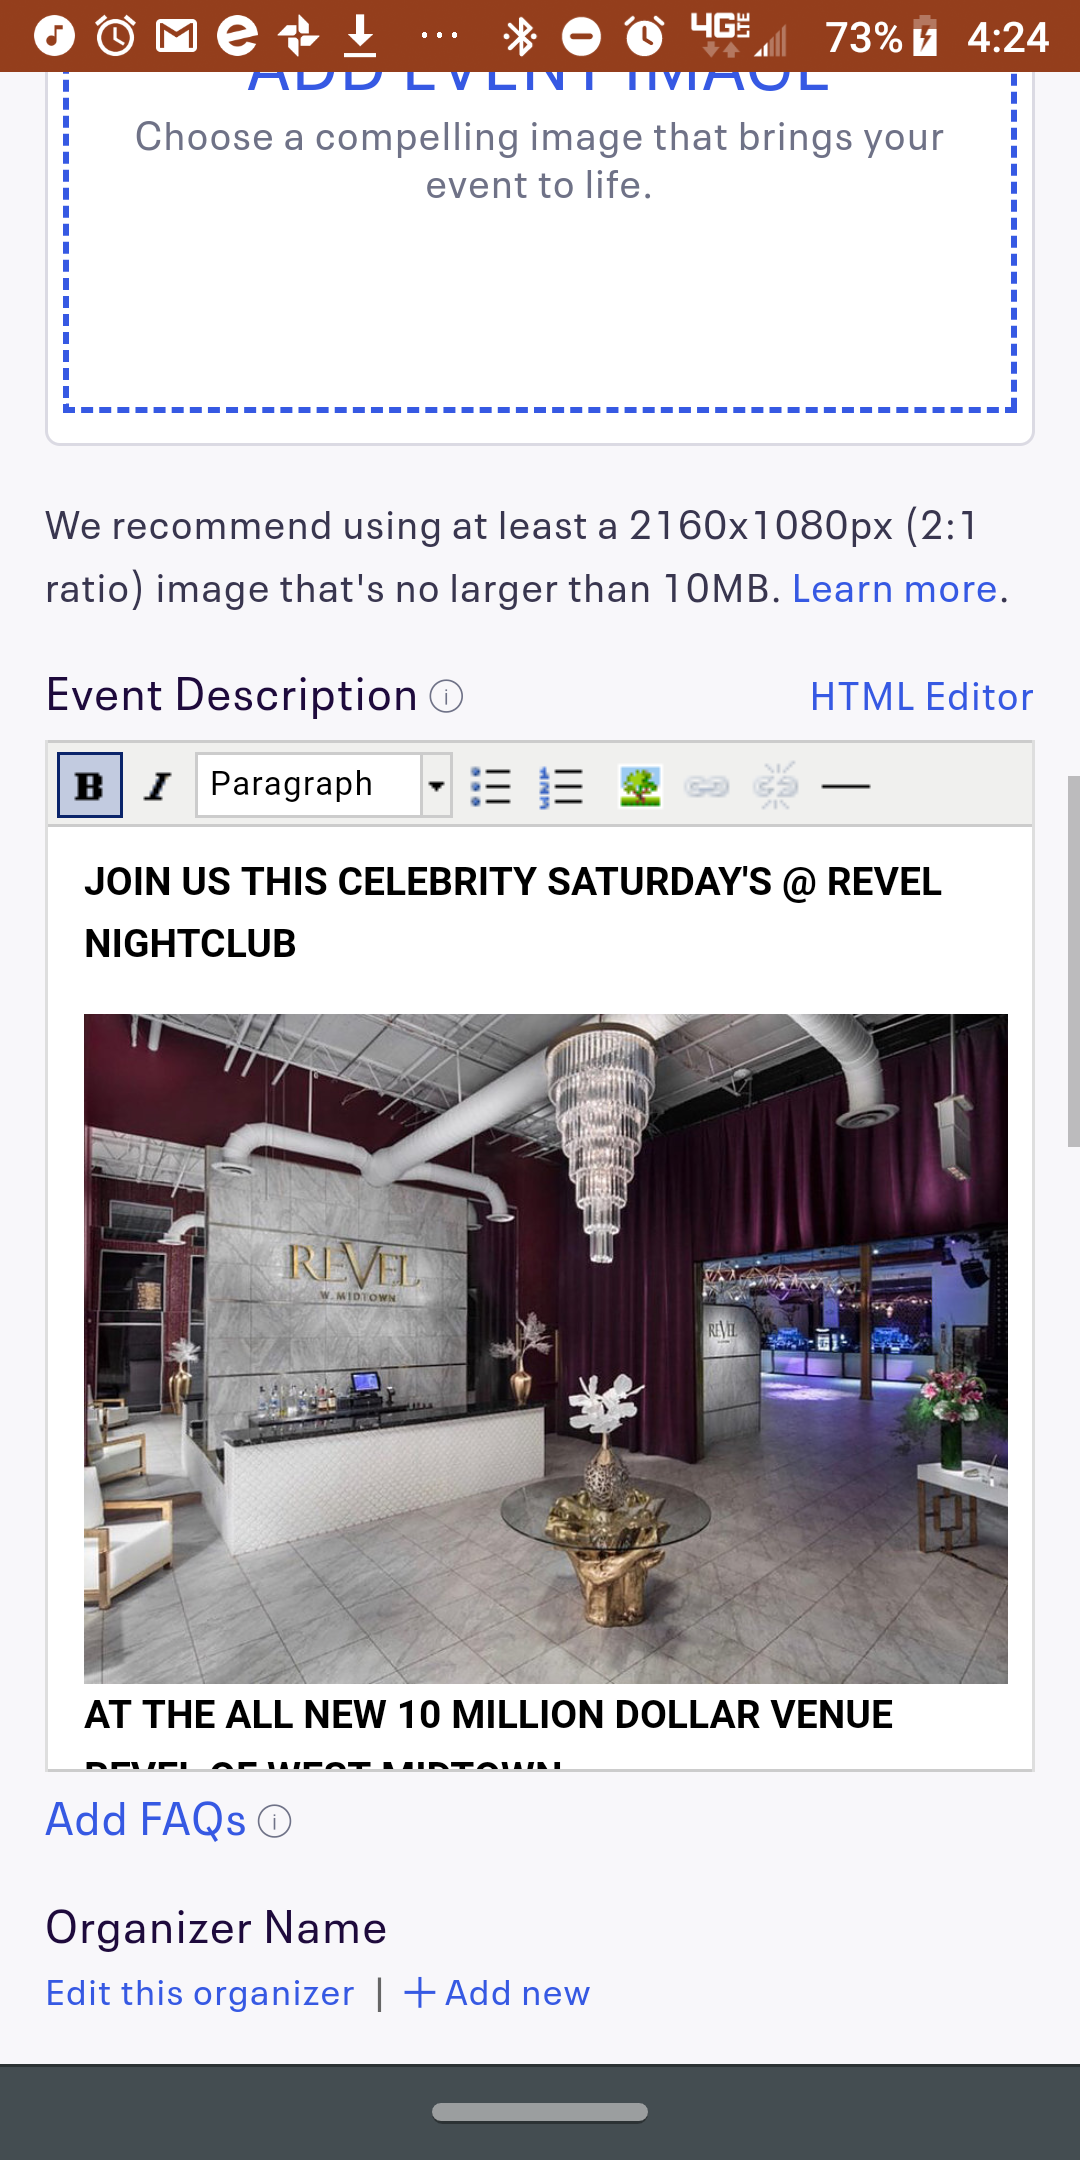 SATURDAYS @REVEL ARE OFFICIALLY BACK!! RSVP NOW! ATL's #1 Saturday Night Party! Celebrity Saturday's @REVEL! RSVP NOW! (SWIRL) 